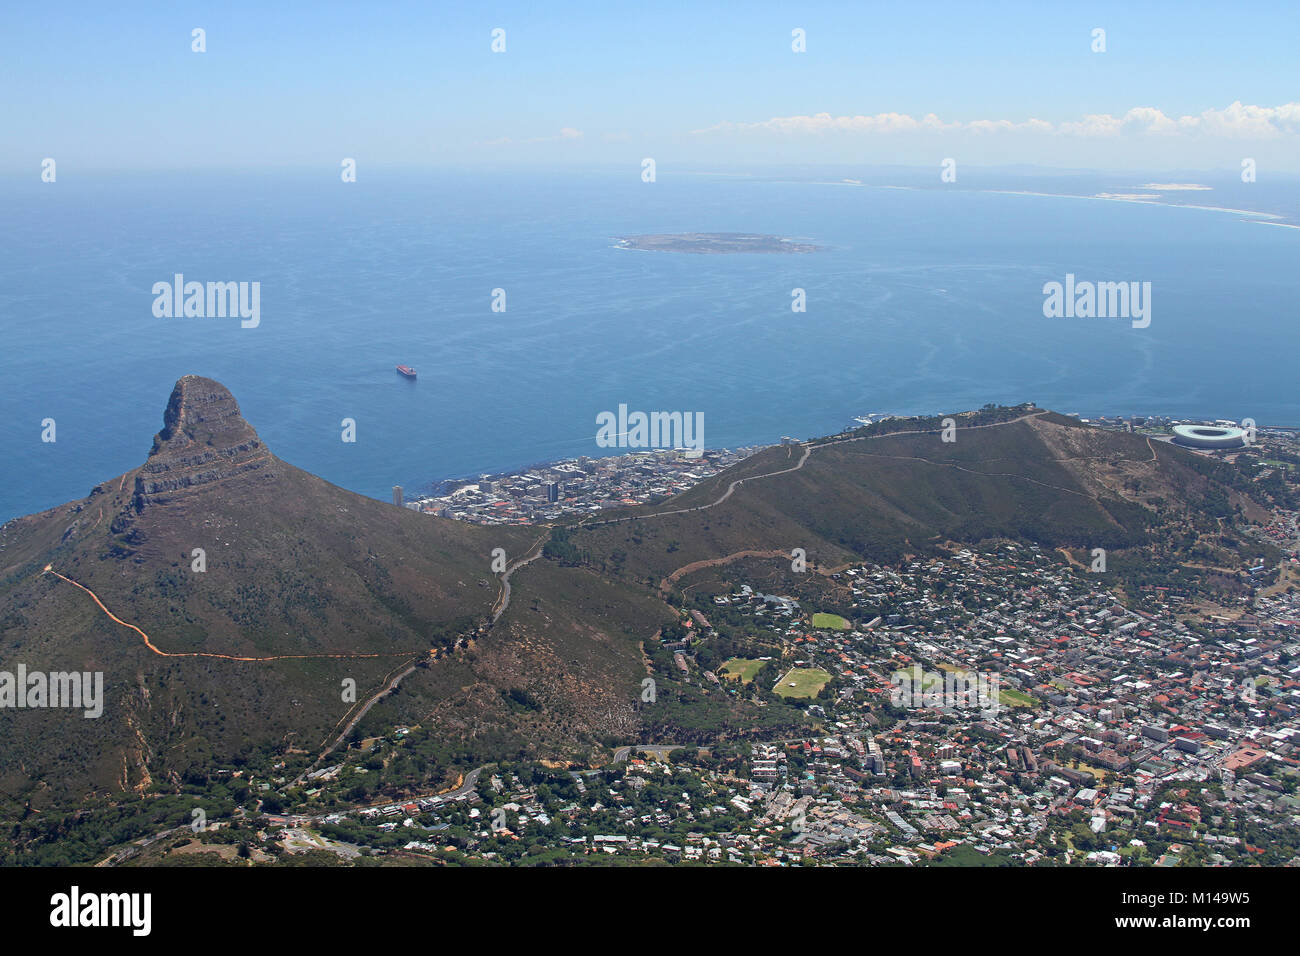 Lion's Head, Robben Island, Signal Hill and Cape Town Stadium from Table Mountain, Western Cape, South Africa. Stock Photo